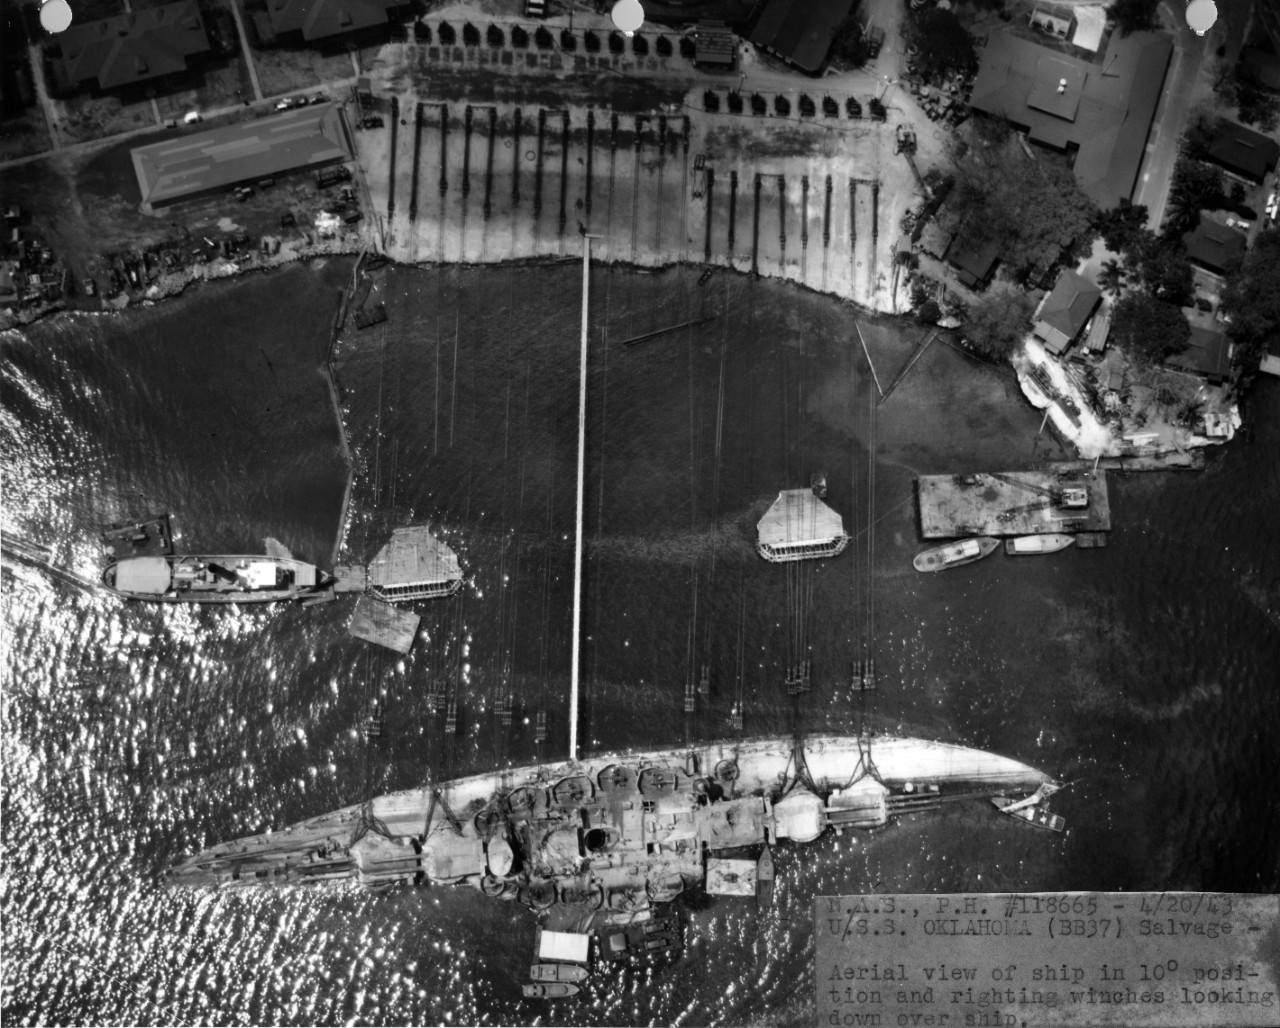 Aerial view of the salvage of the Oklahoma at Pearl Harbor